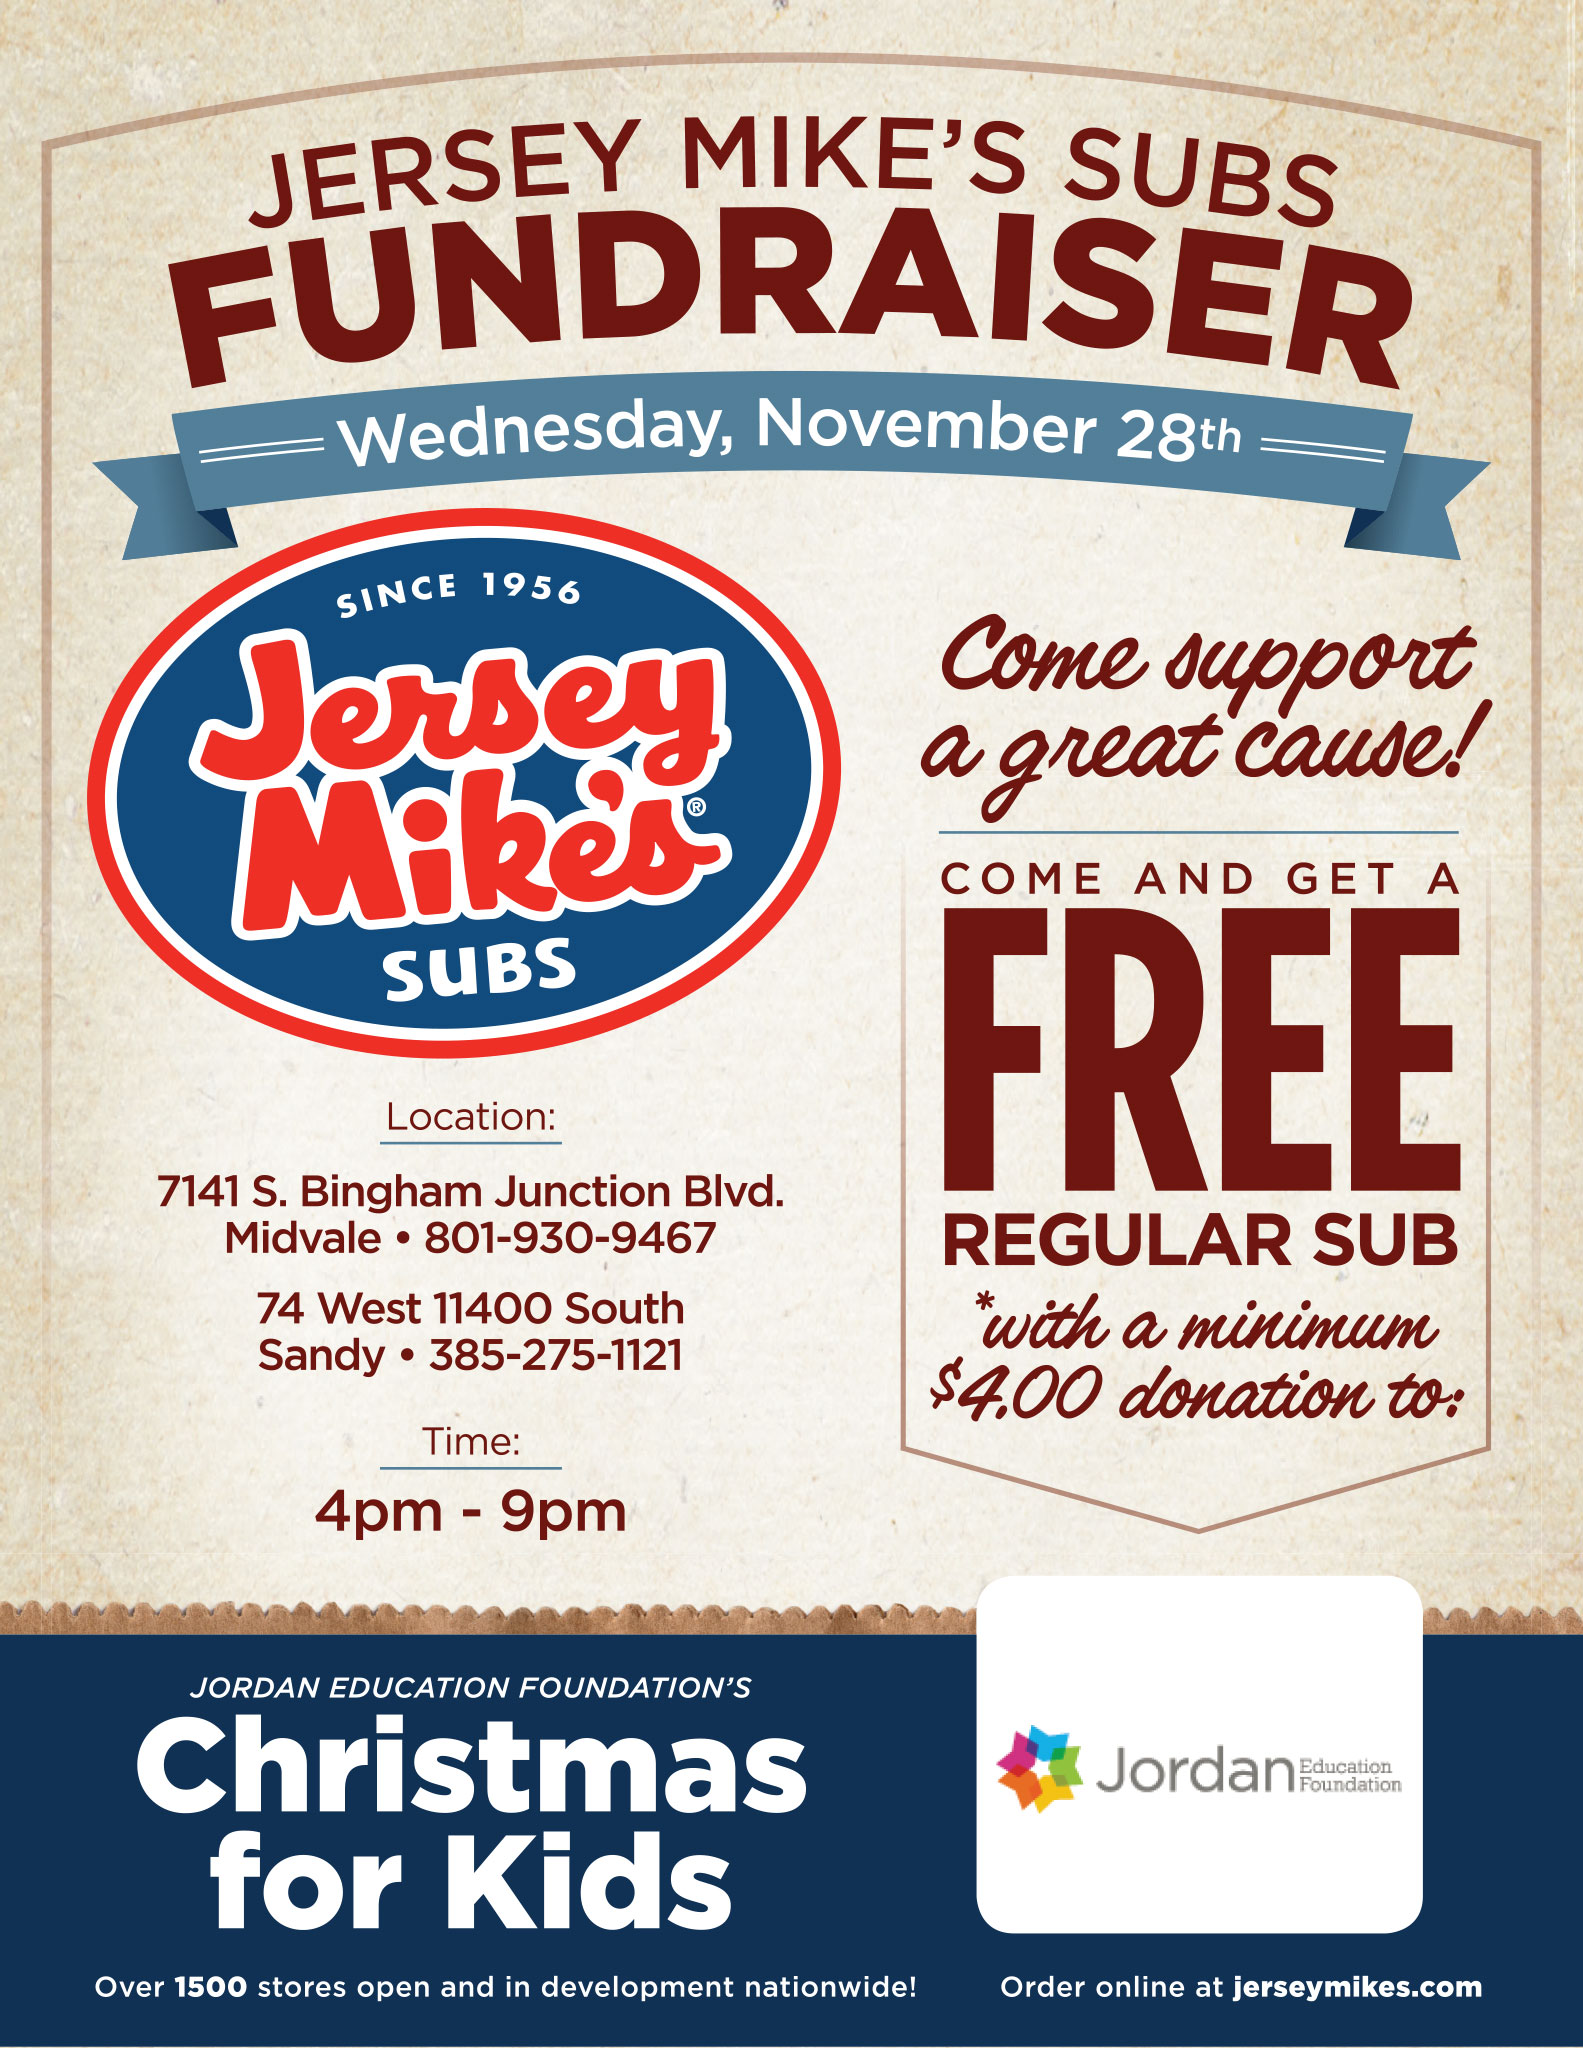 Jersey Mike's Subs Fundraiser for Jordan Education Foundation